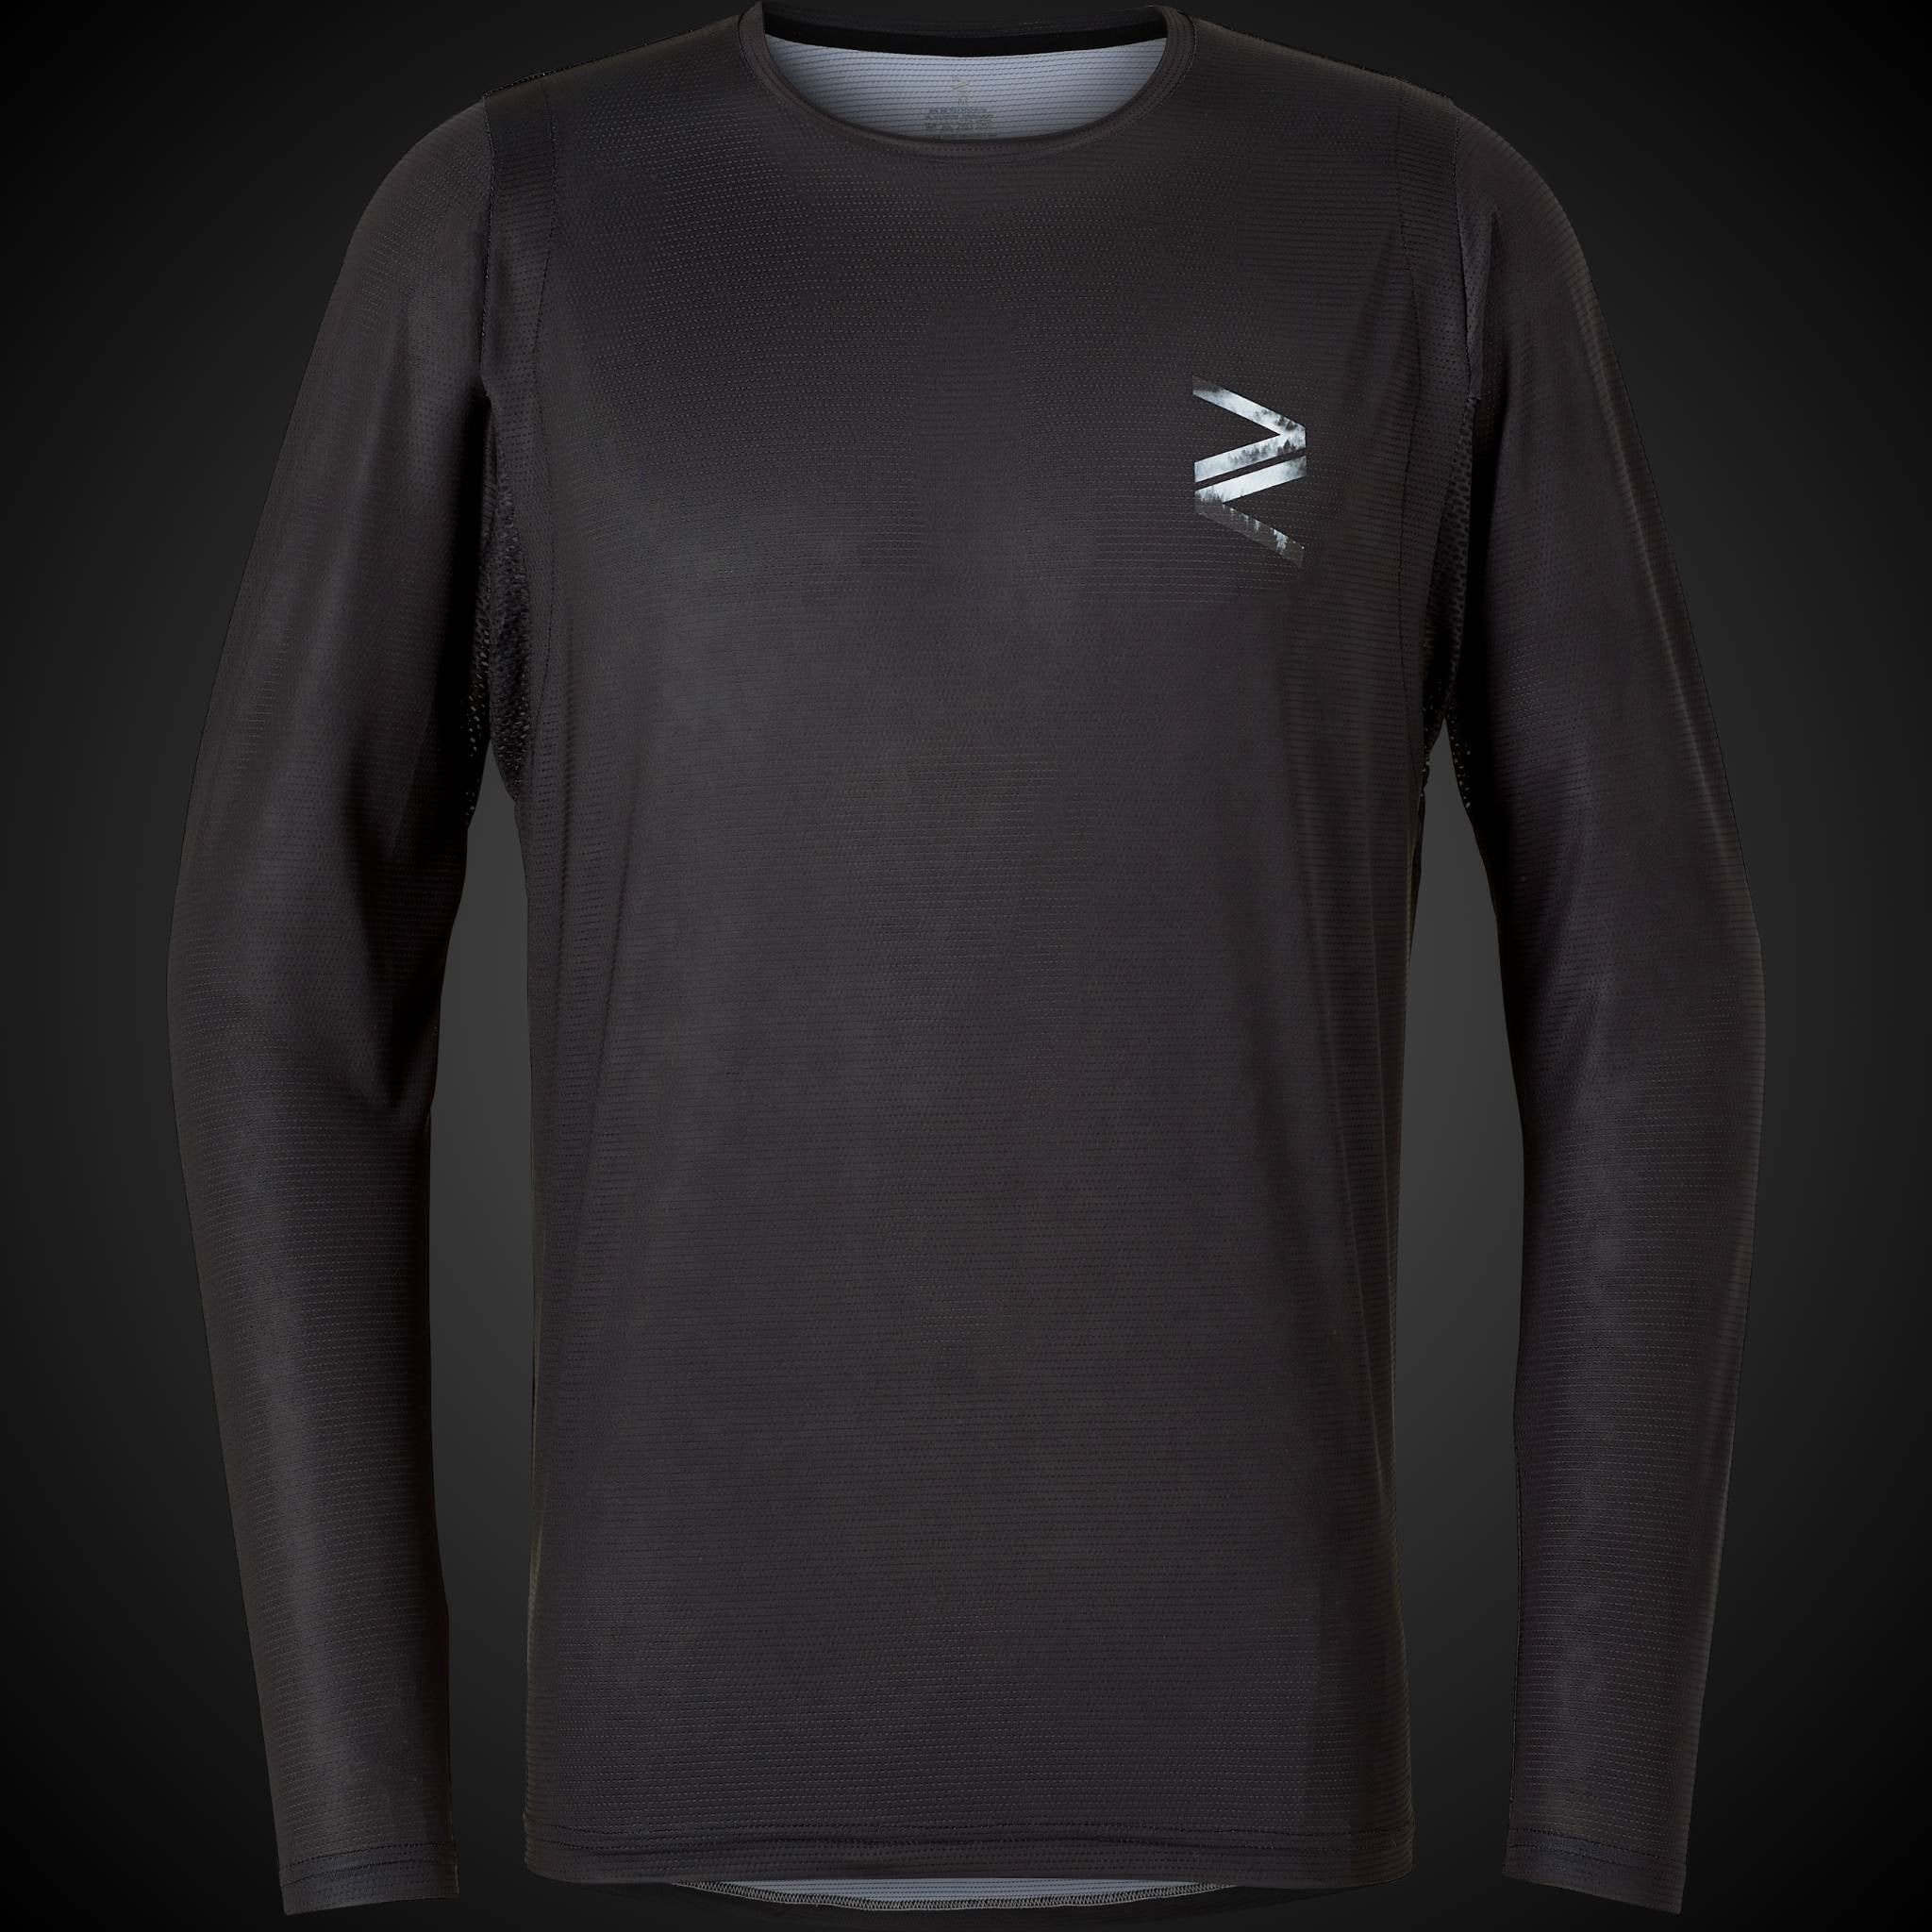 Black long sleeve jersey for mountain biking, designed with sustainable stretch fabric, perfect for enduro and downhill riding